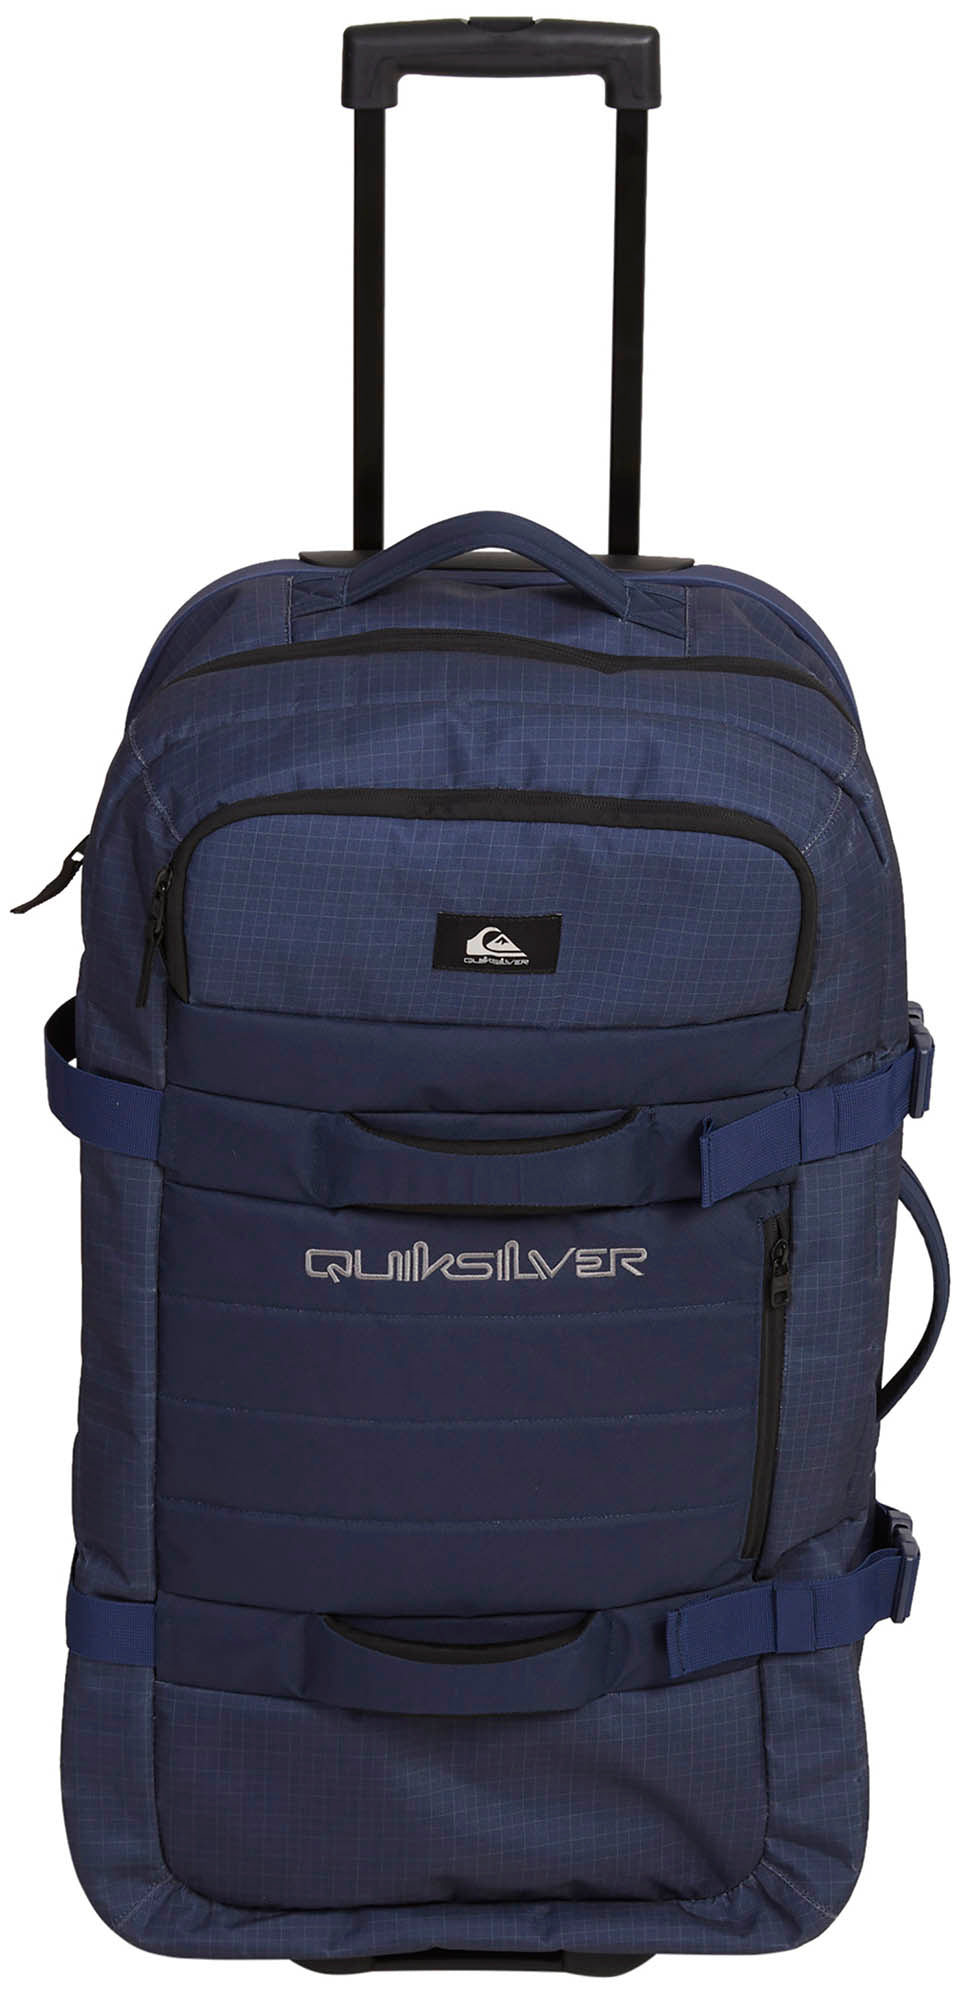 thebackpacker Naval Reach Academy – New Suitcase Quiksilver - 100L